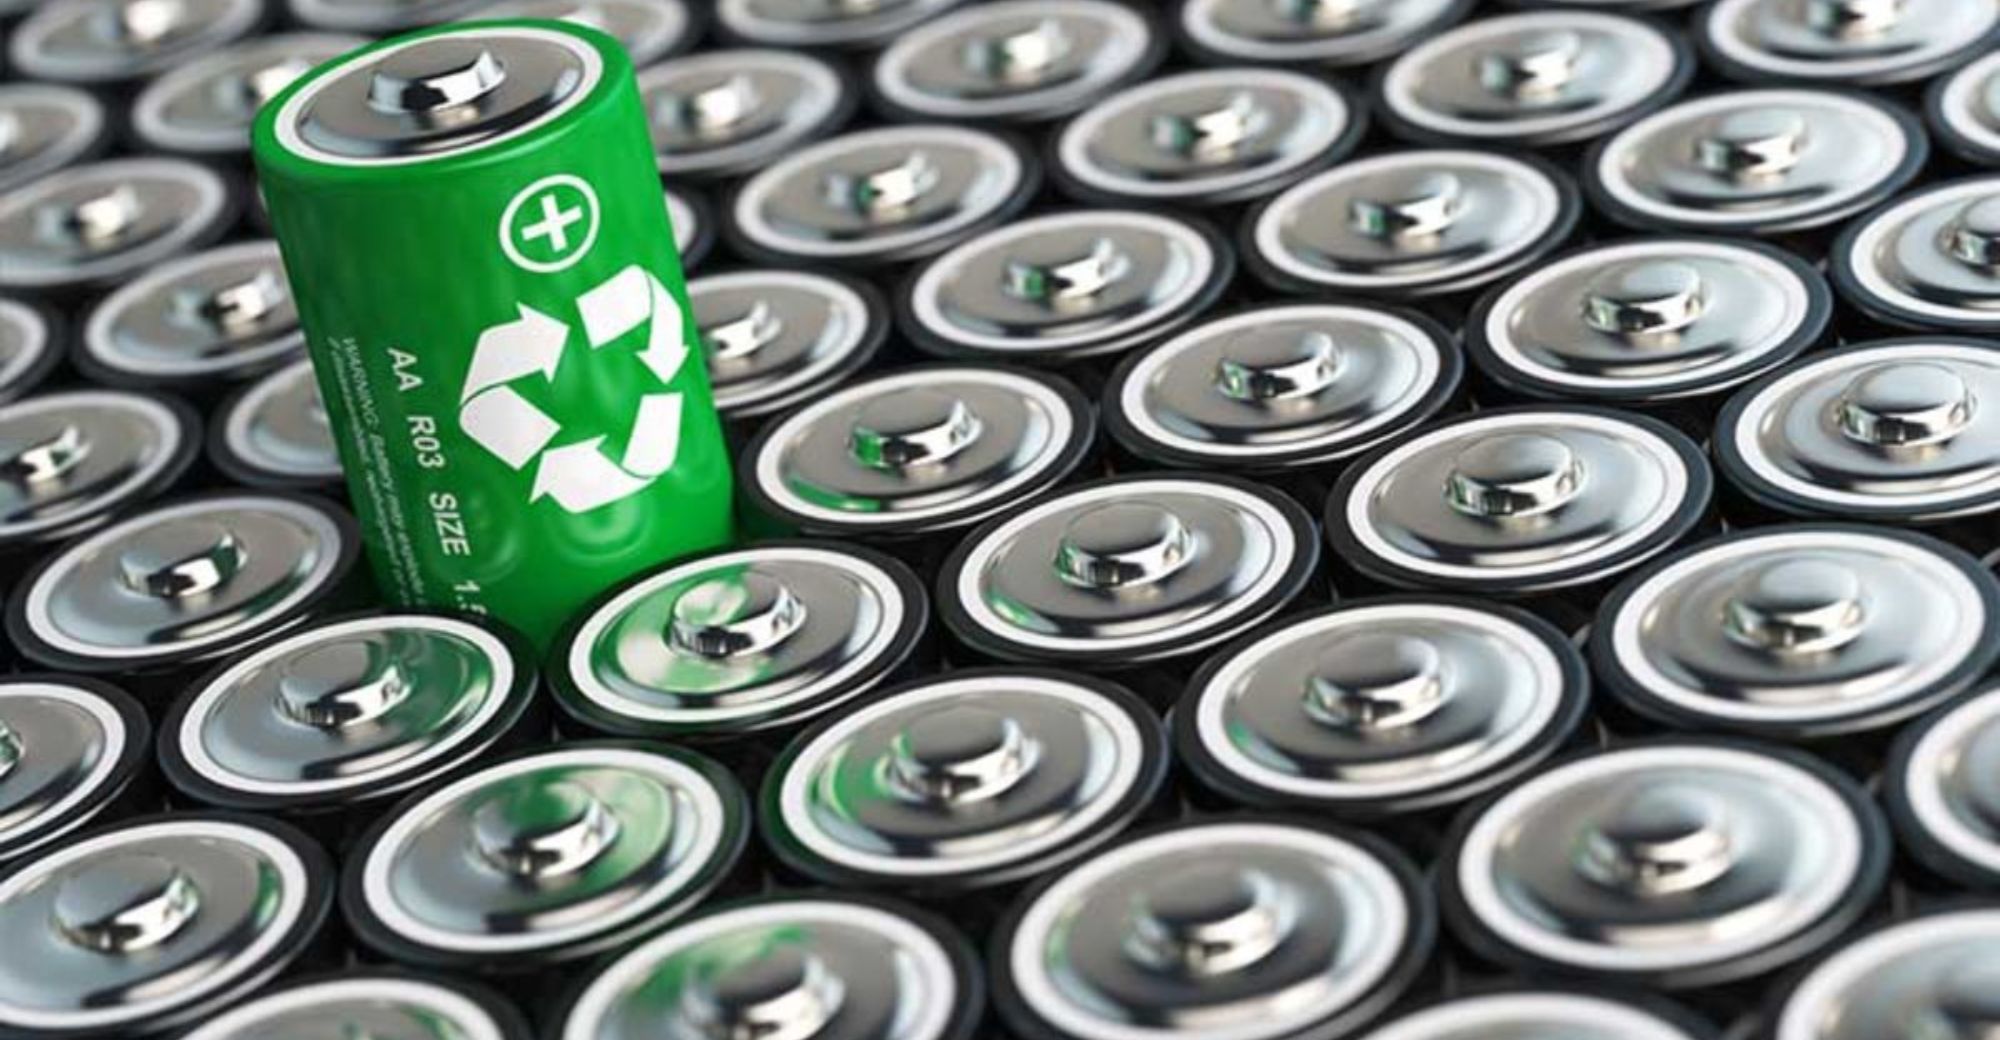 Battery Recycling Firm Ruicycle Completes B Round of Financing